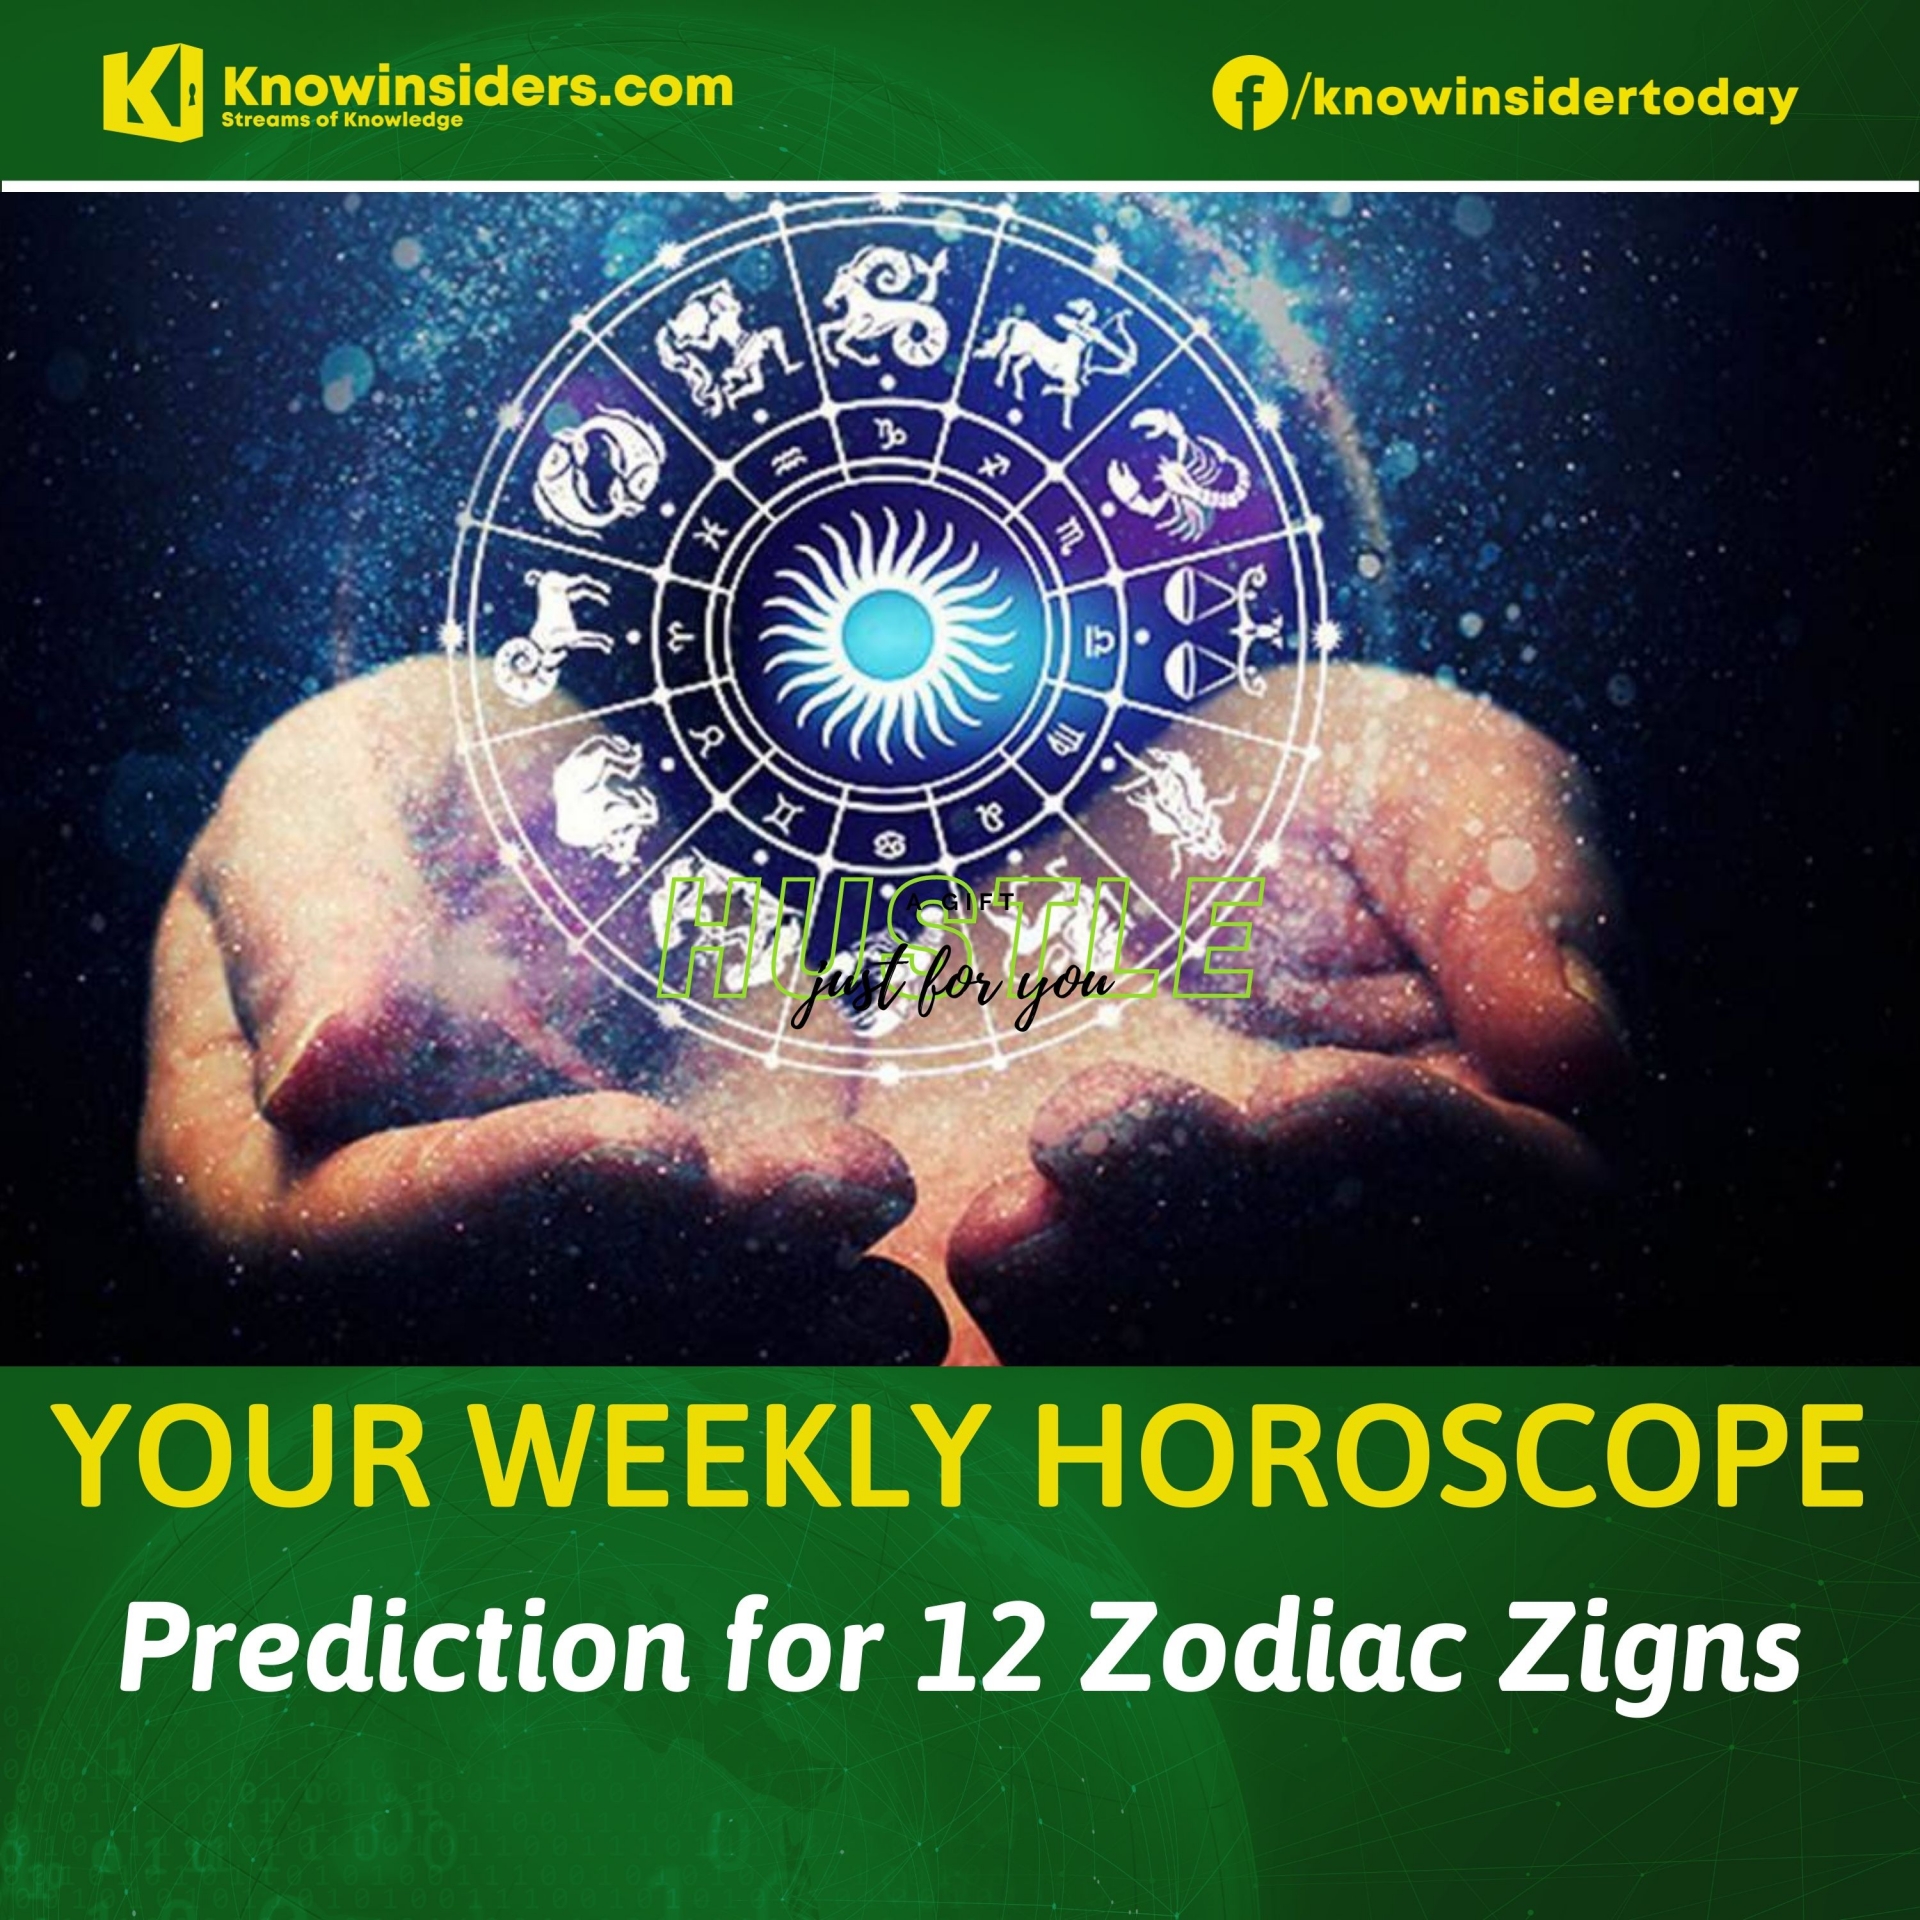 Weekly Horoscope from June 24 to June 30 of 12 Zodiac Signs